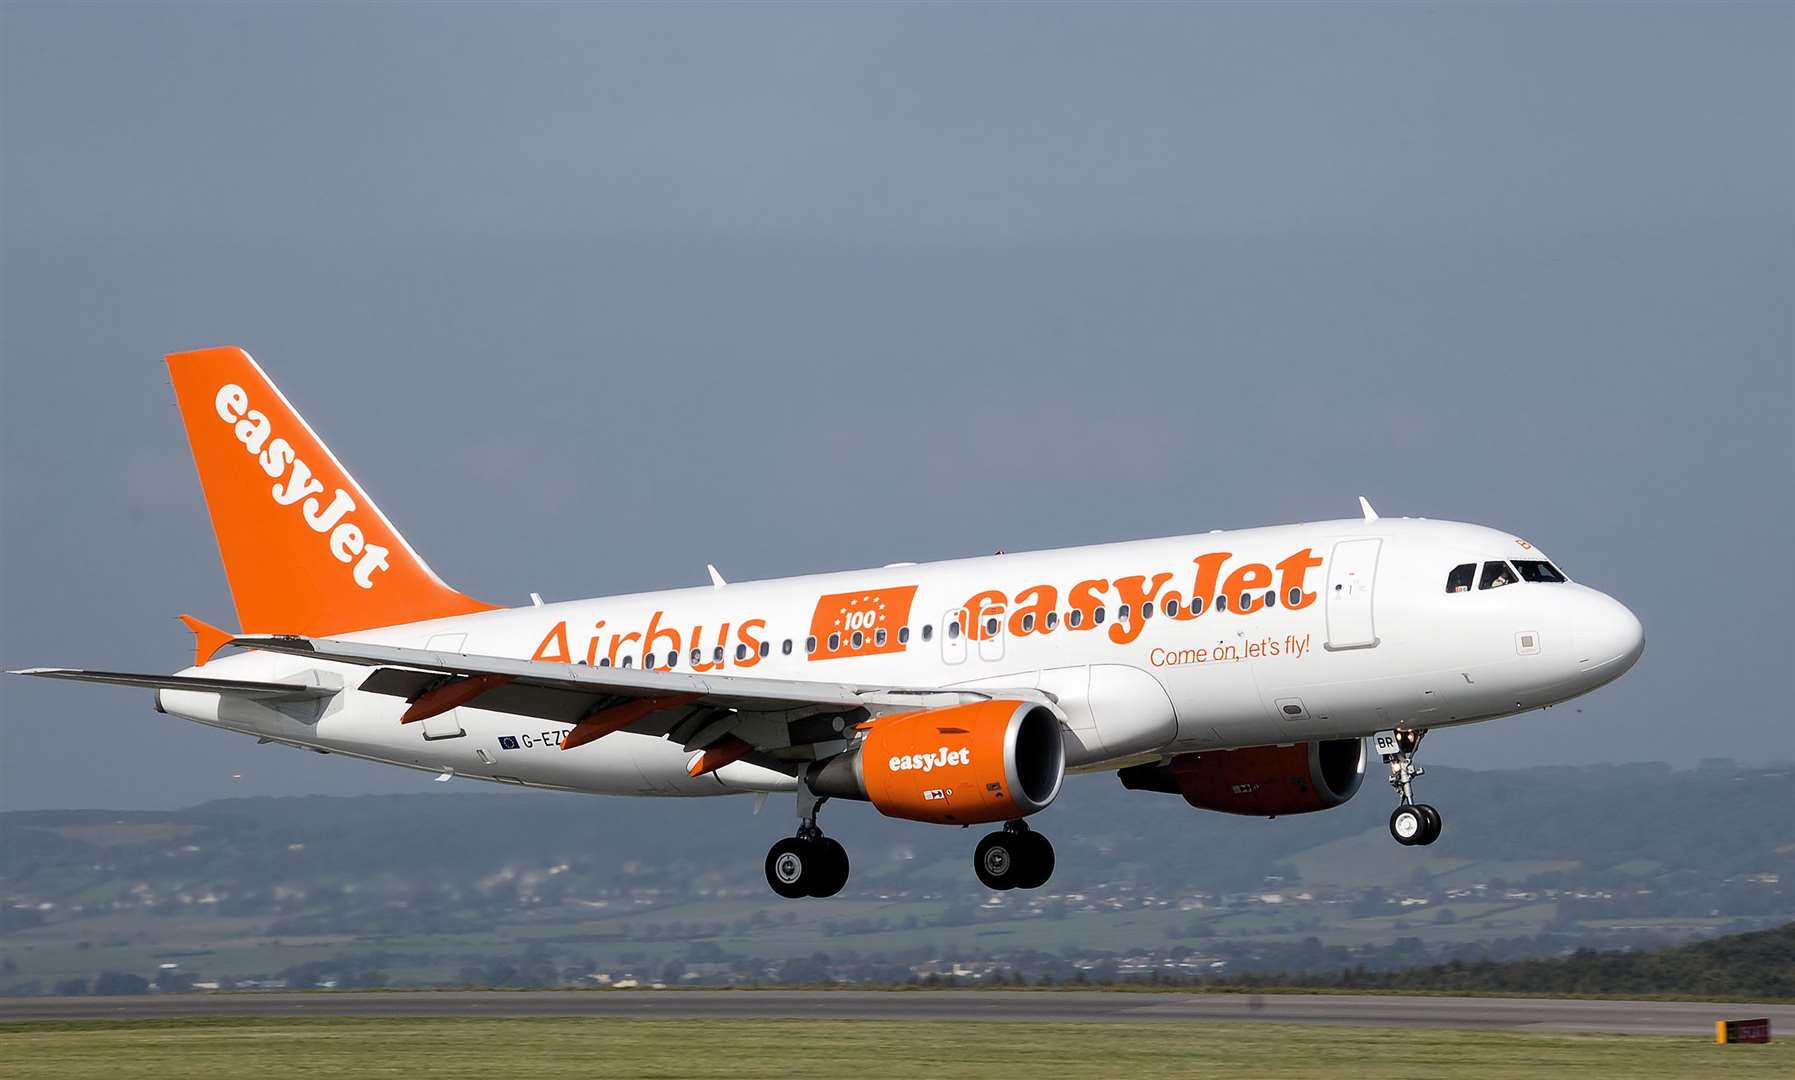 Easyjet is continue to operate a full schedule